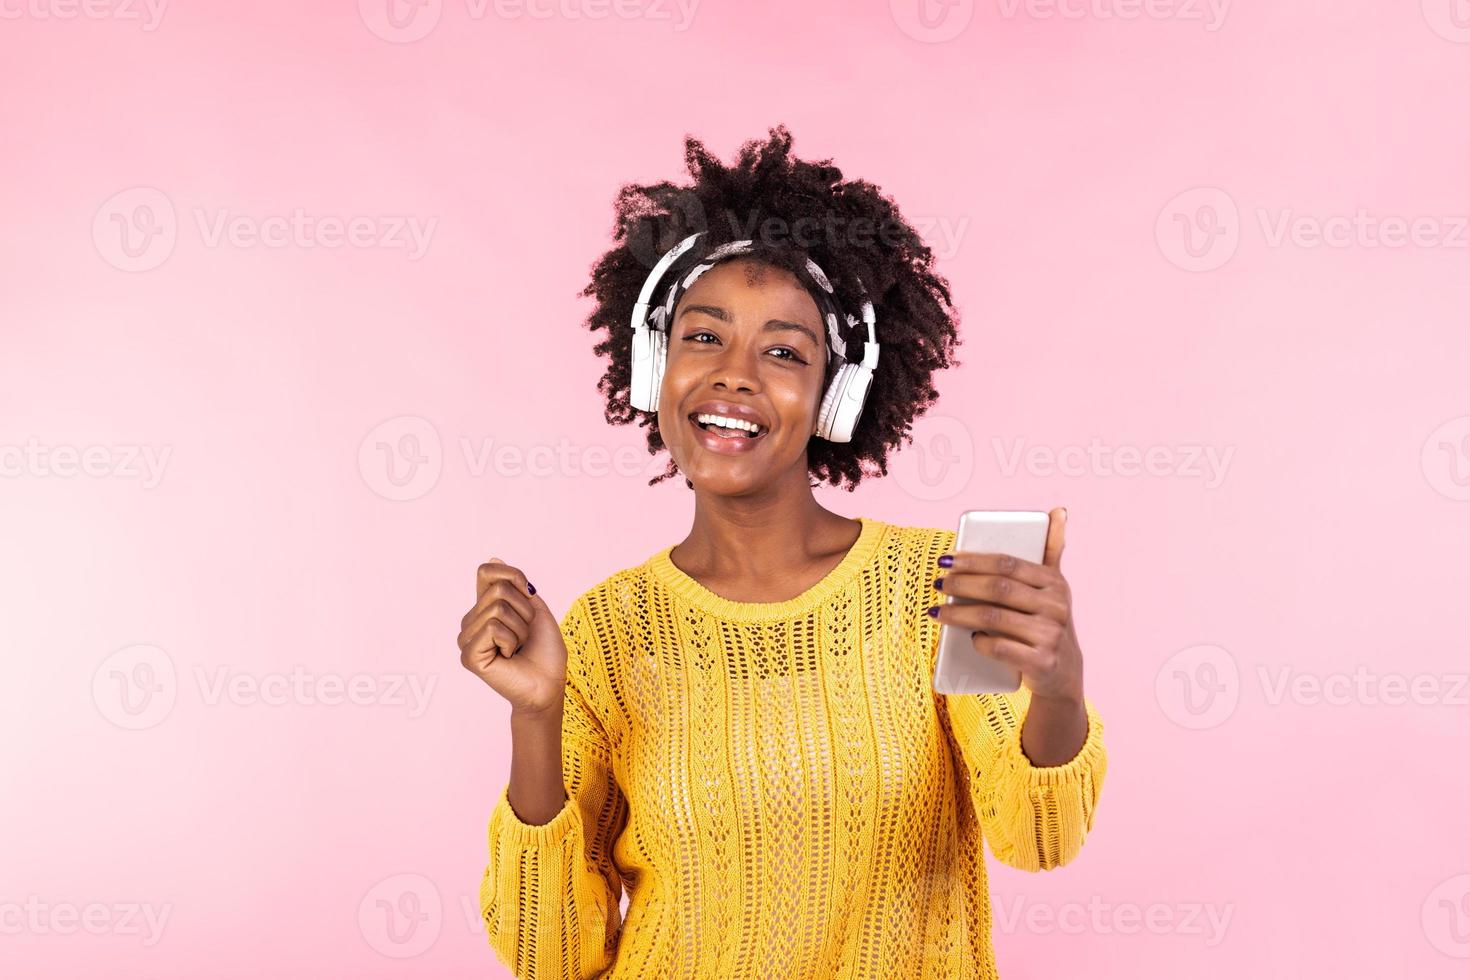 Lifestyle Concept - Portrait of beautiful African American woman joyful listening to music on mobile phone. trendy stylish cute girl in headphones listening to music dancing isolated pink background photo